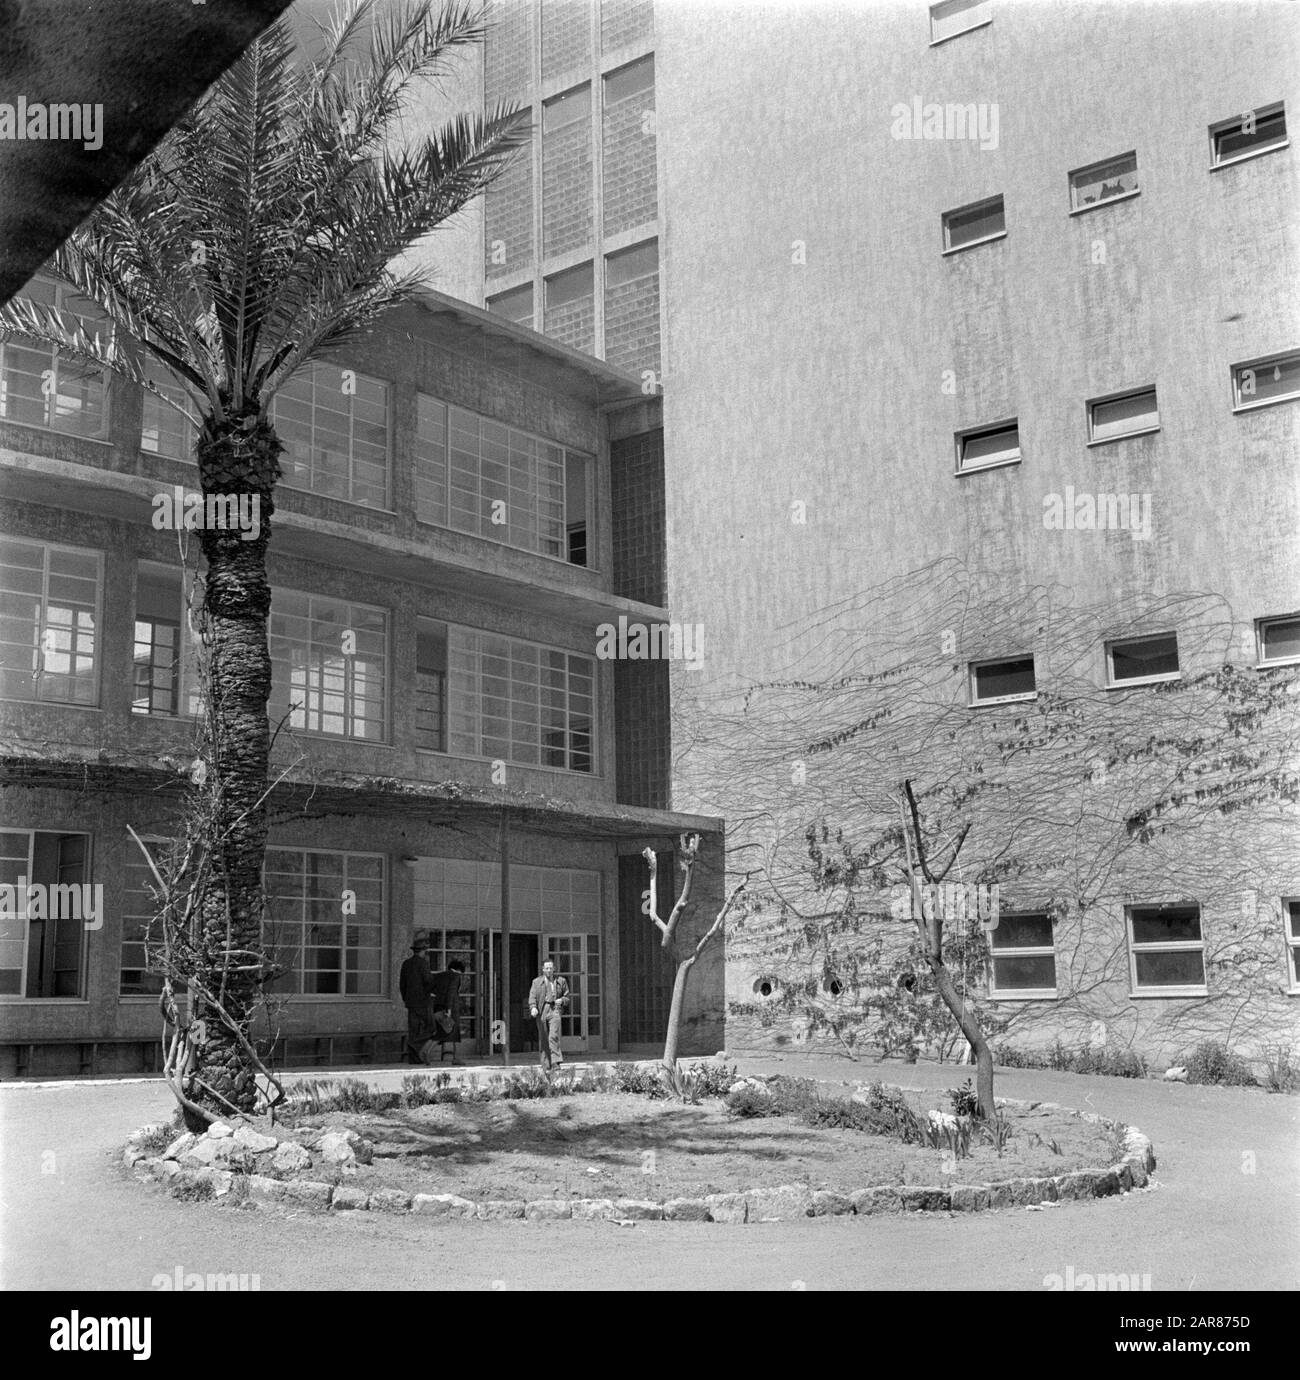 Israel 1948-1949: Haifa  Government Hospital with a bed for it Date: 1948 Location: Haifa, Israel Keywords: architecture, healthcare, landscaping, windows, hospitals Stock Photo